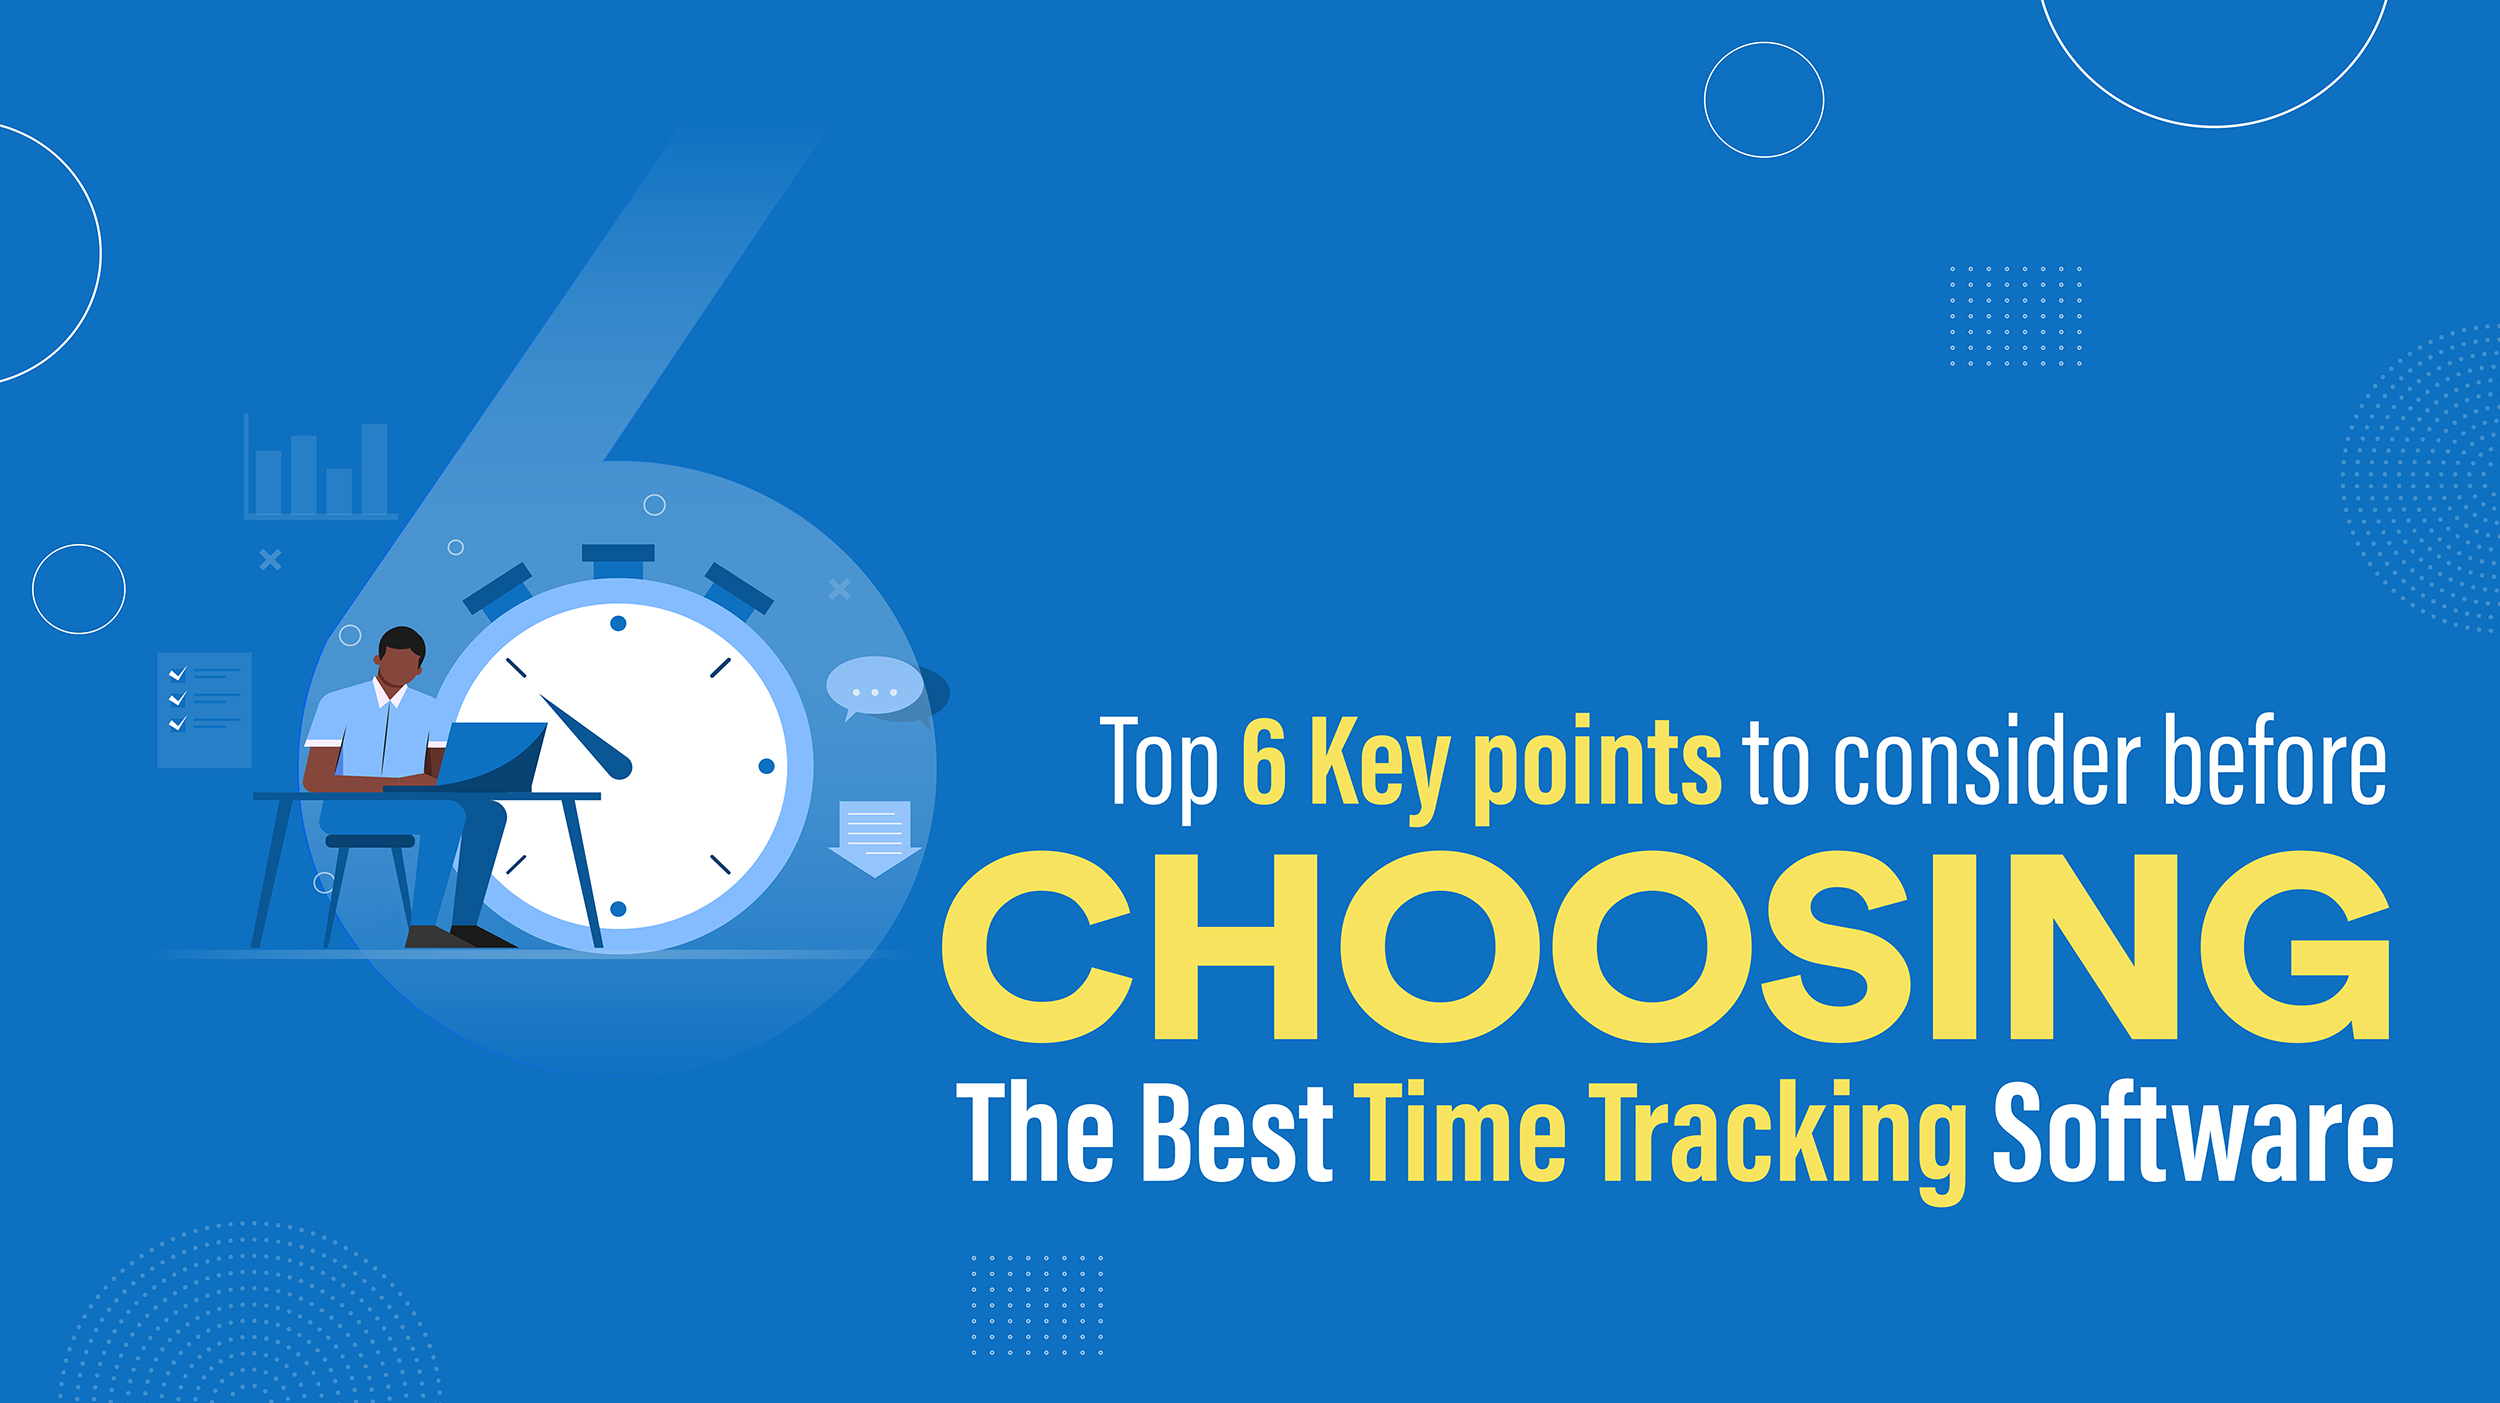 Top 6 Key points to consider before Choosing The Best Time Tracking Software 6